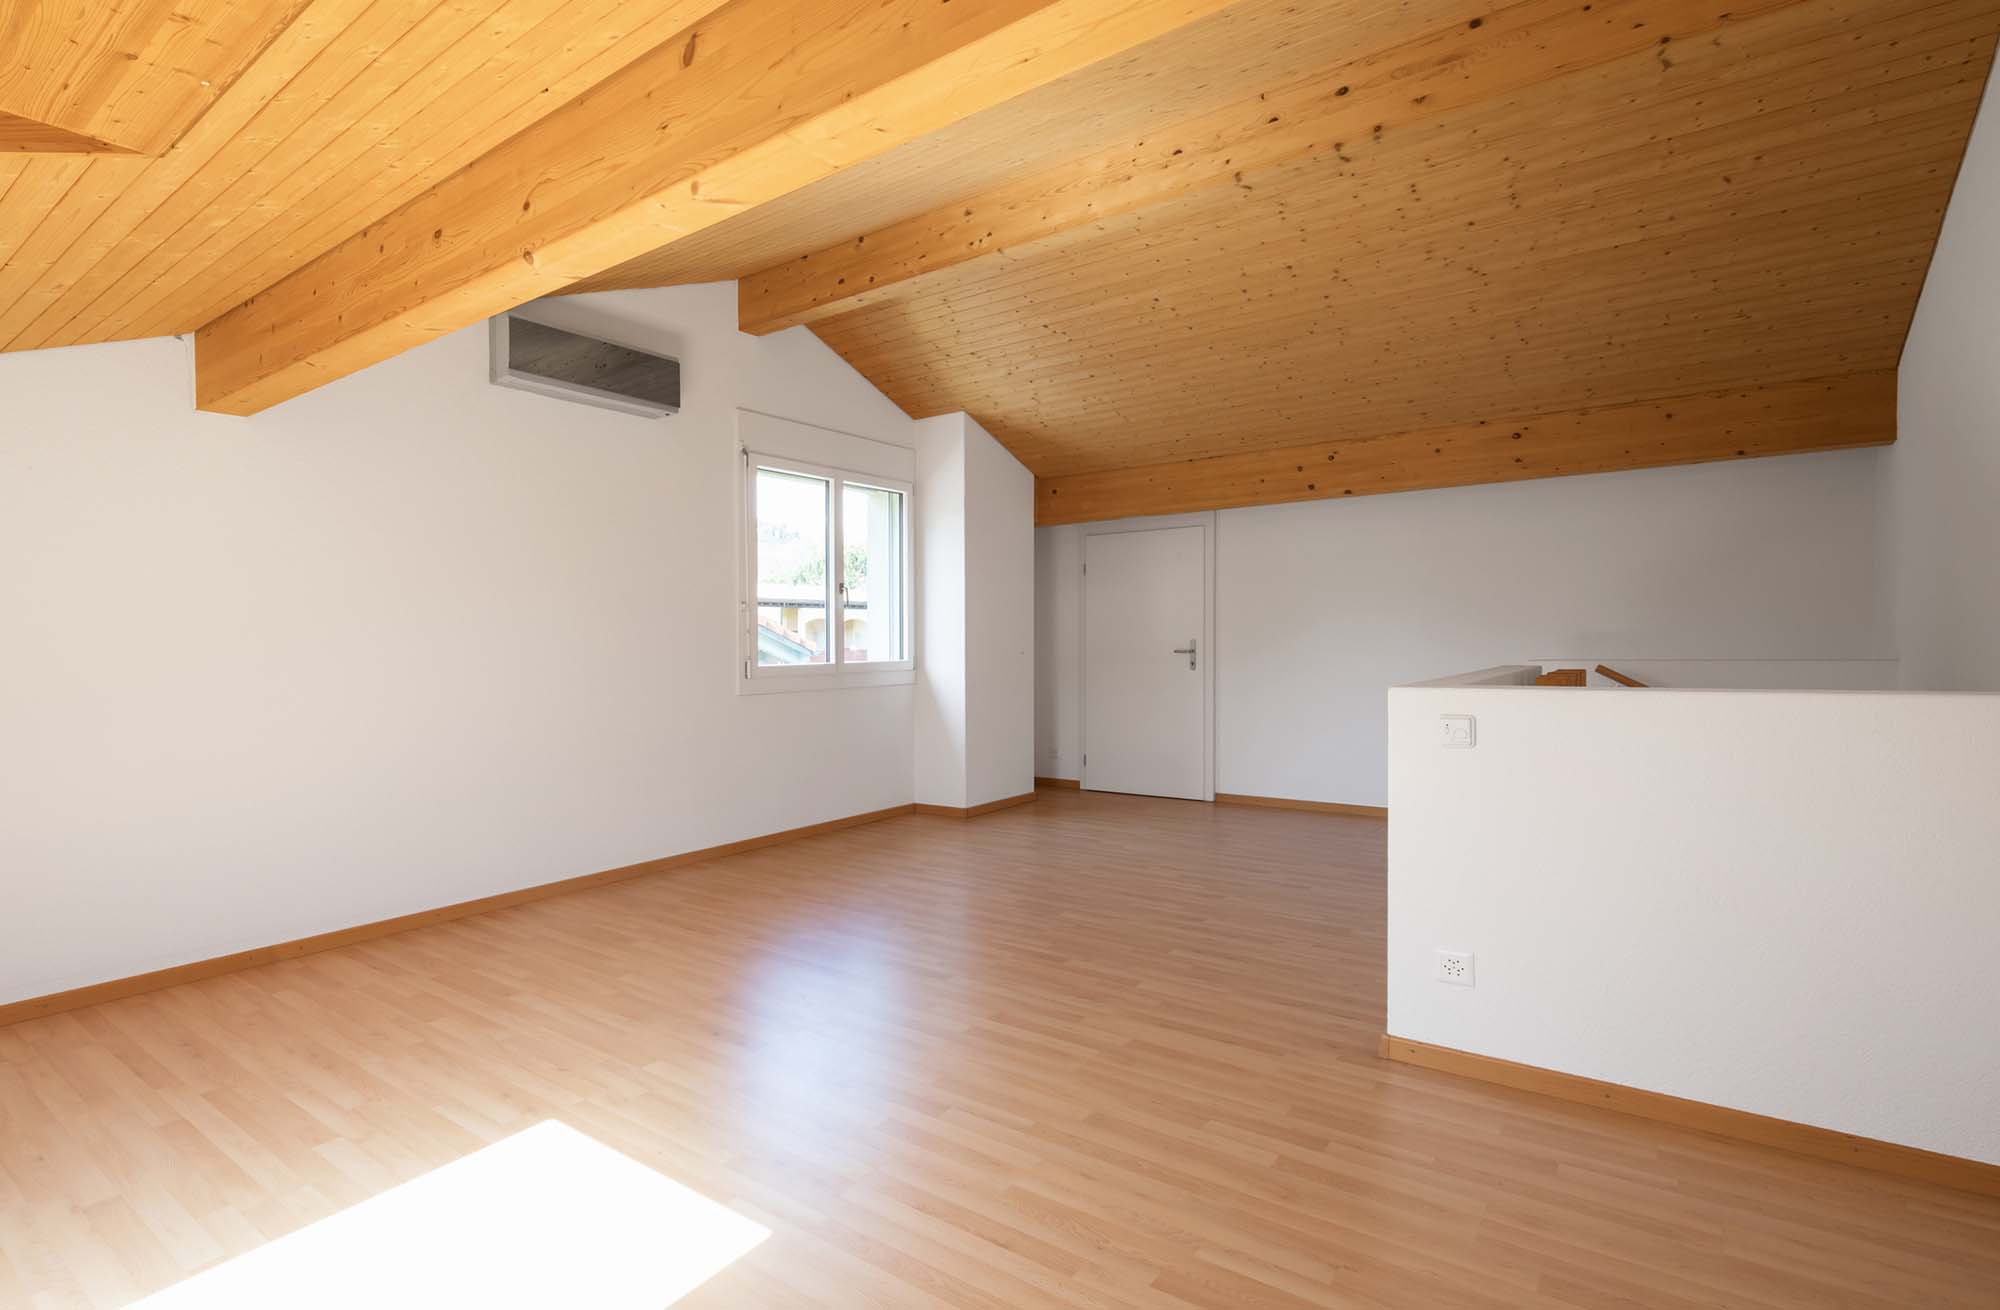 Large attic with wooden floors and exposed beams. White walls, perfect for copy-sace